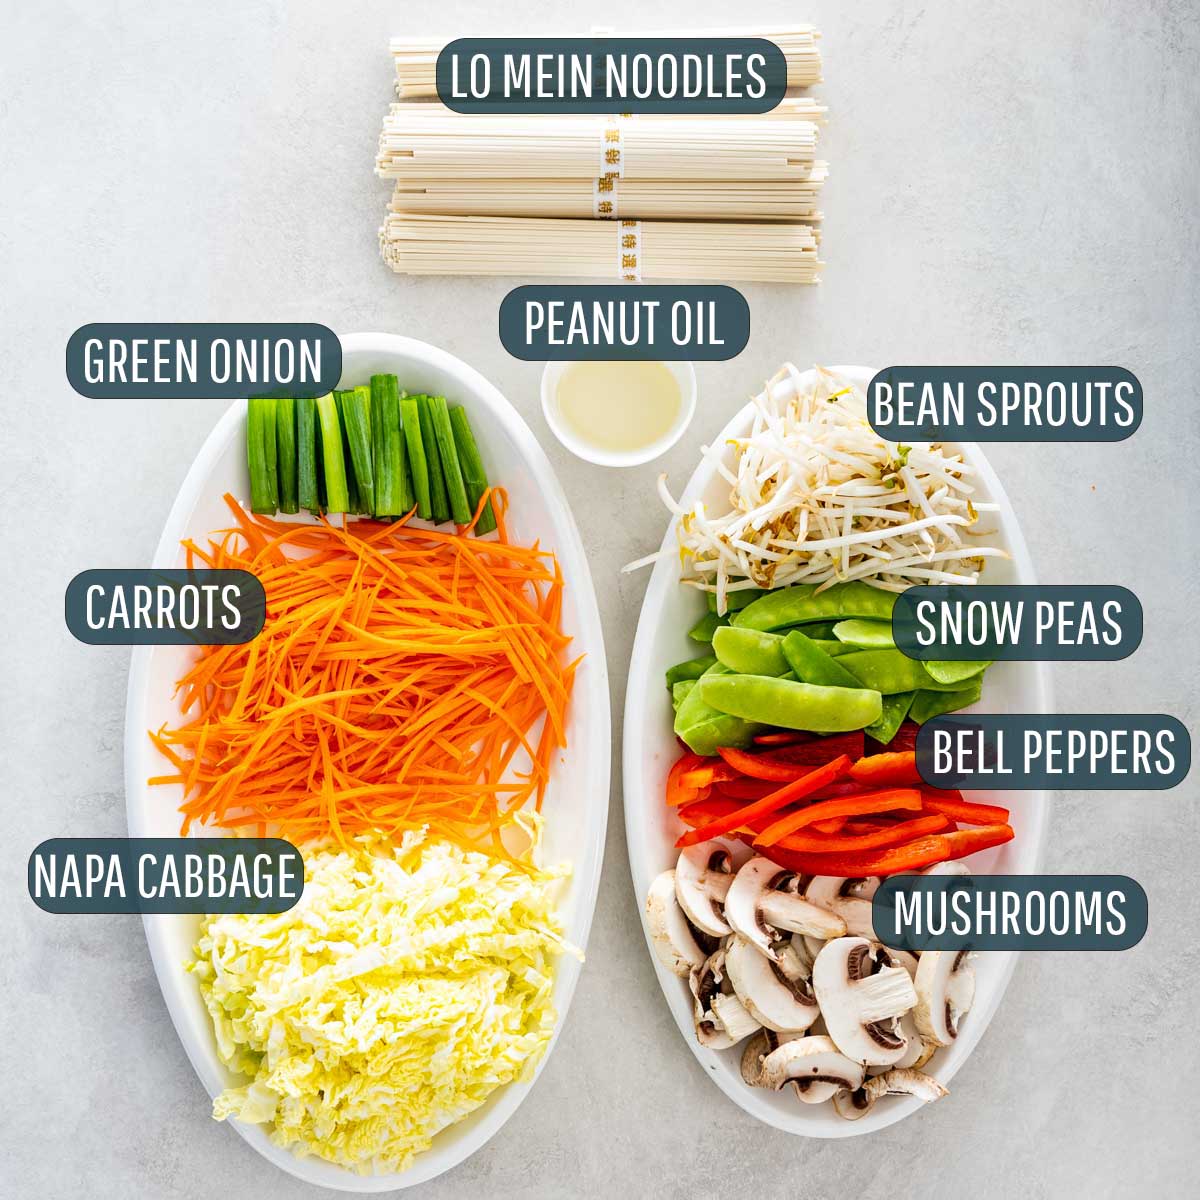 ingredients needed to make beef lo mein.